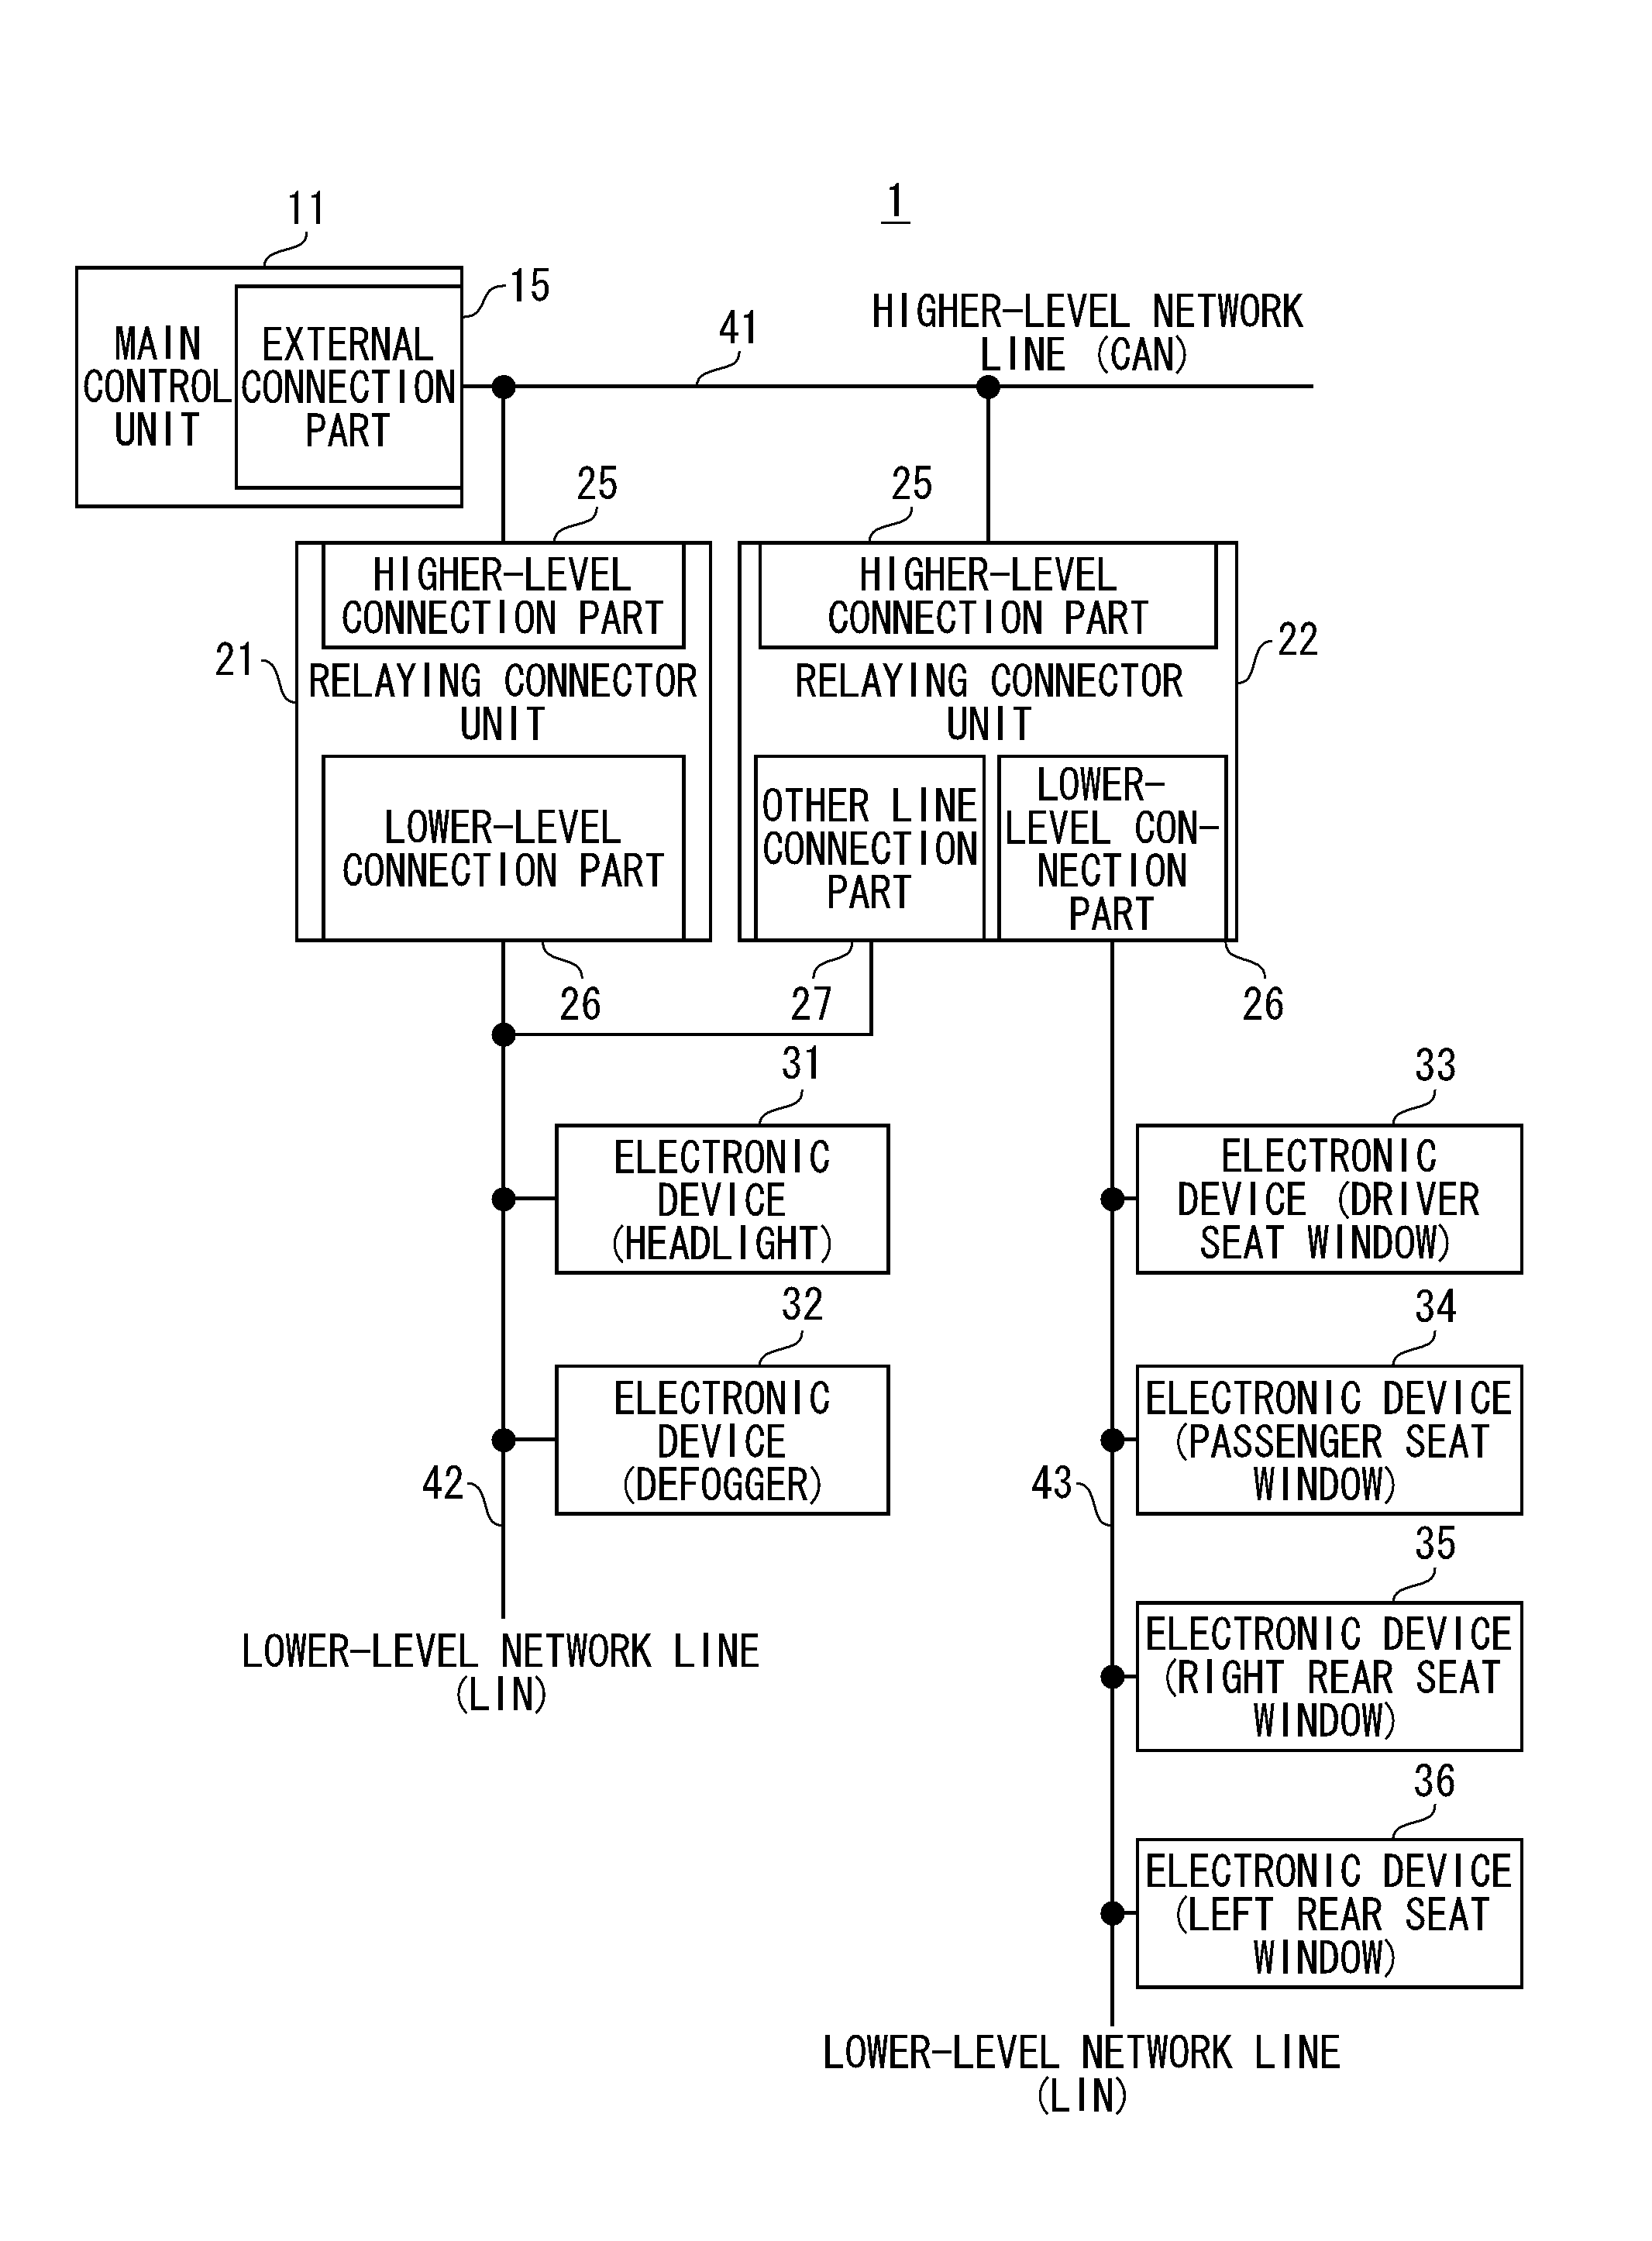 Operation Support Apparatus, Electronic Device, Electronic Control Unit and Control System